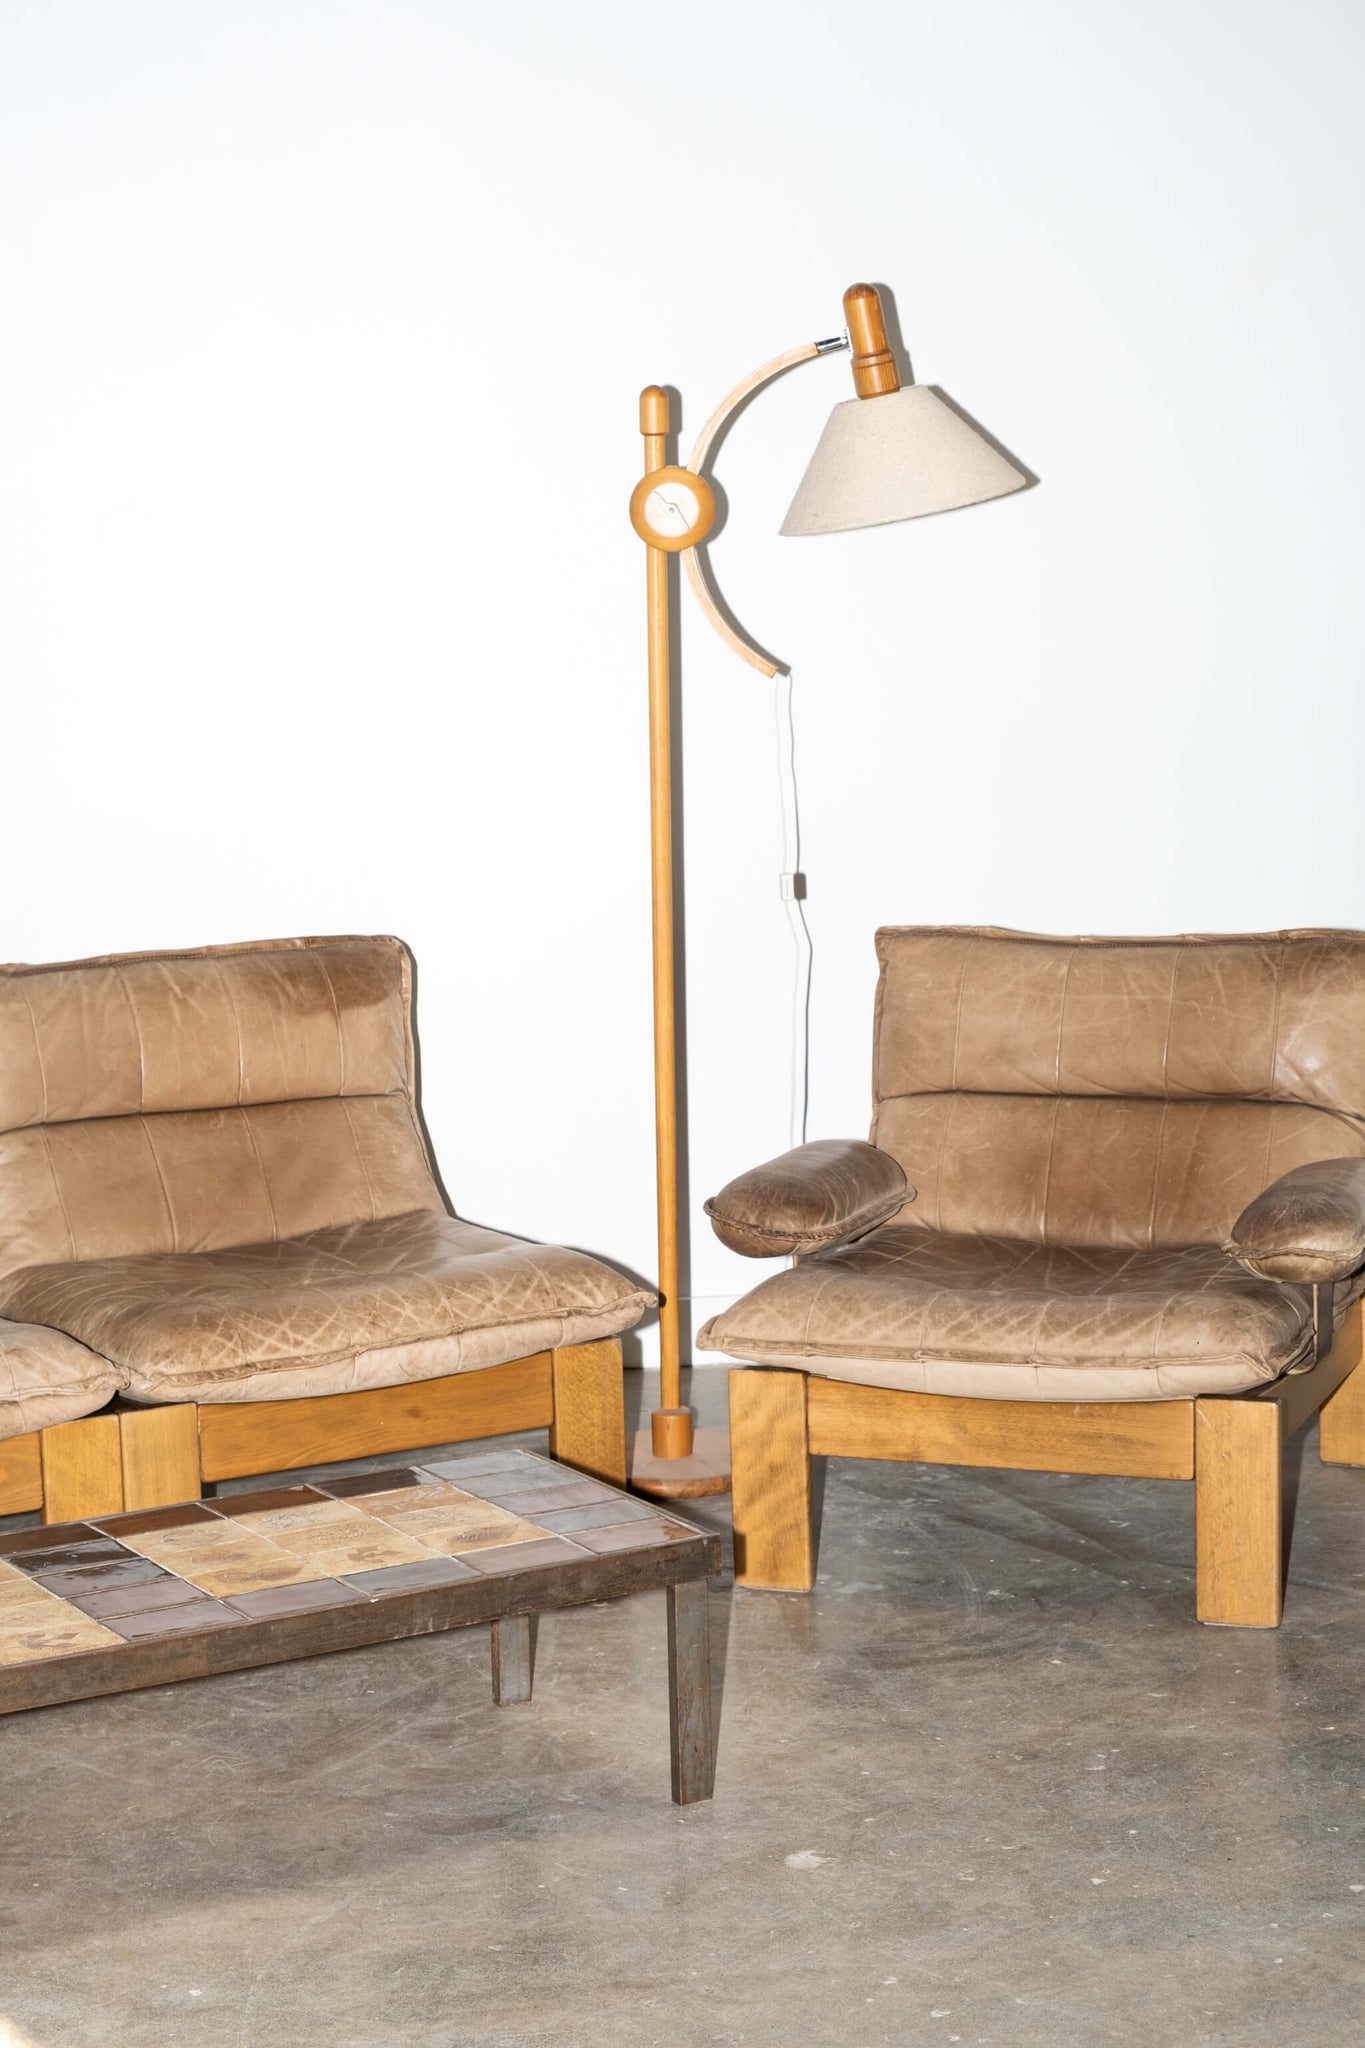 Vintage Arc Pivot Floor Lamp in Pine, shown with tan and wood leather sofa set